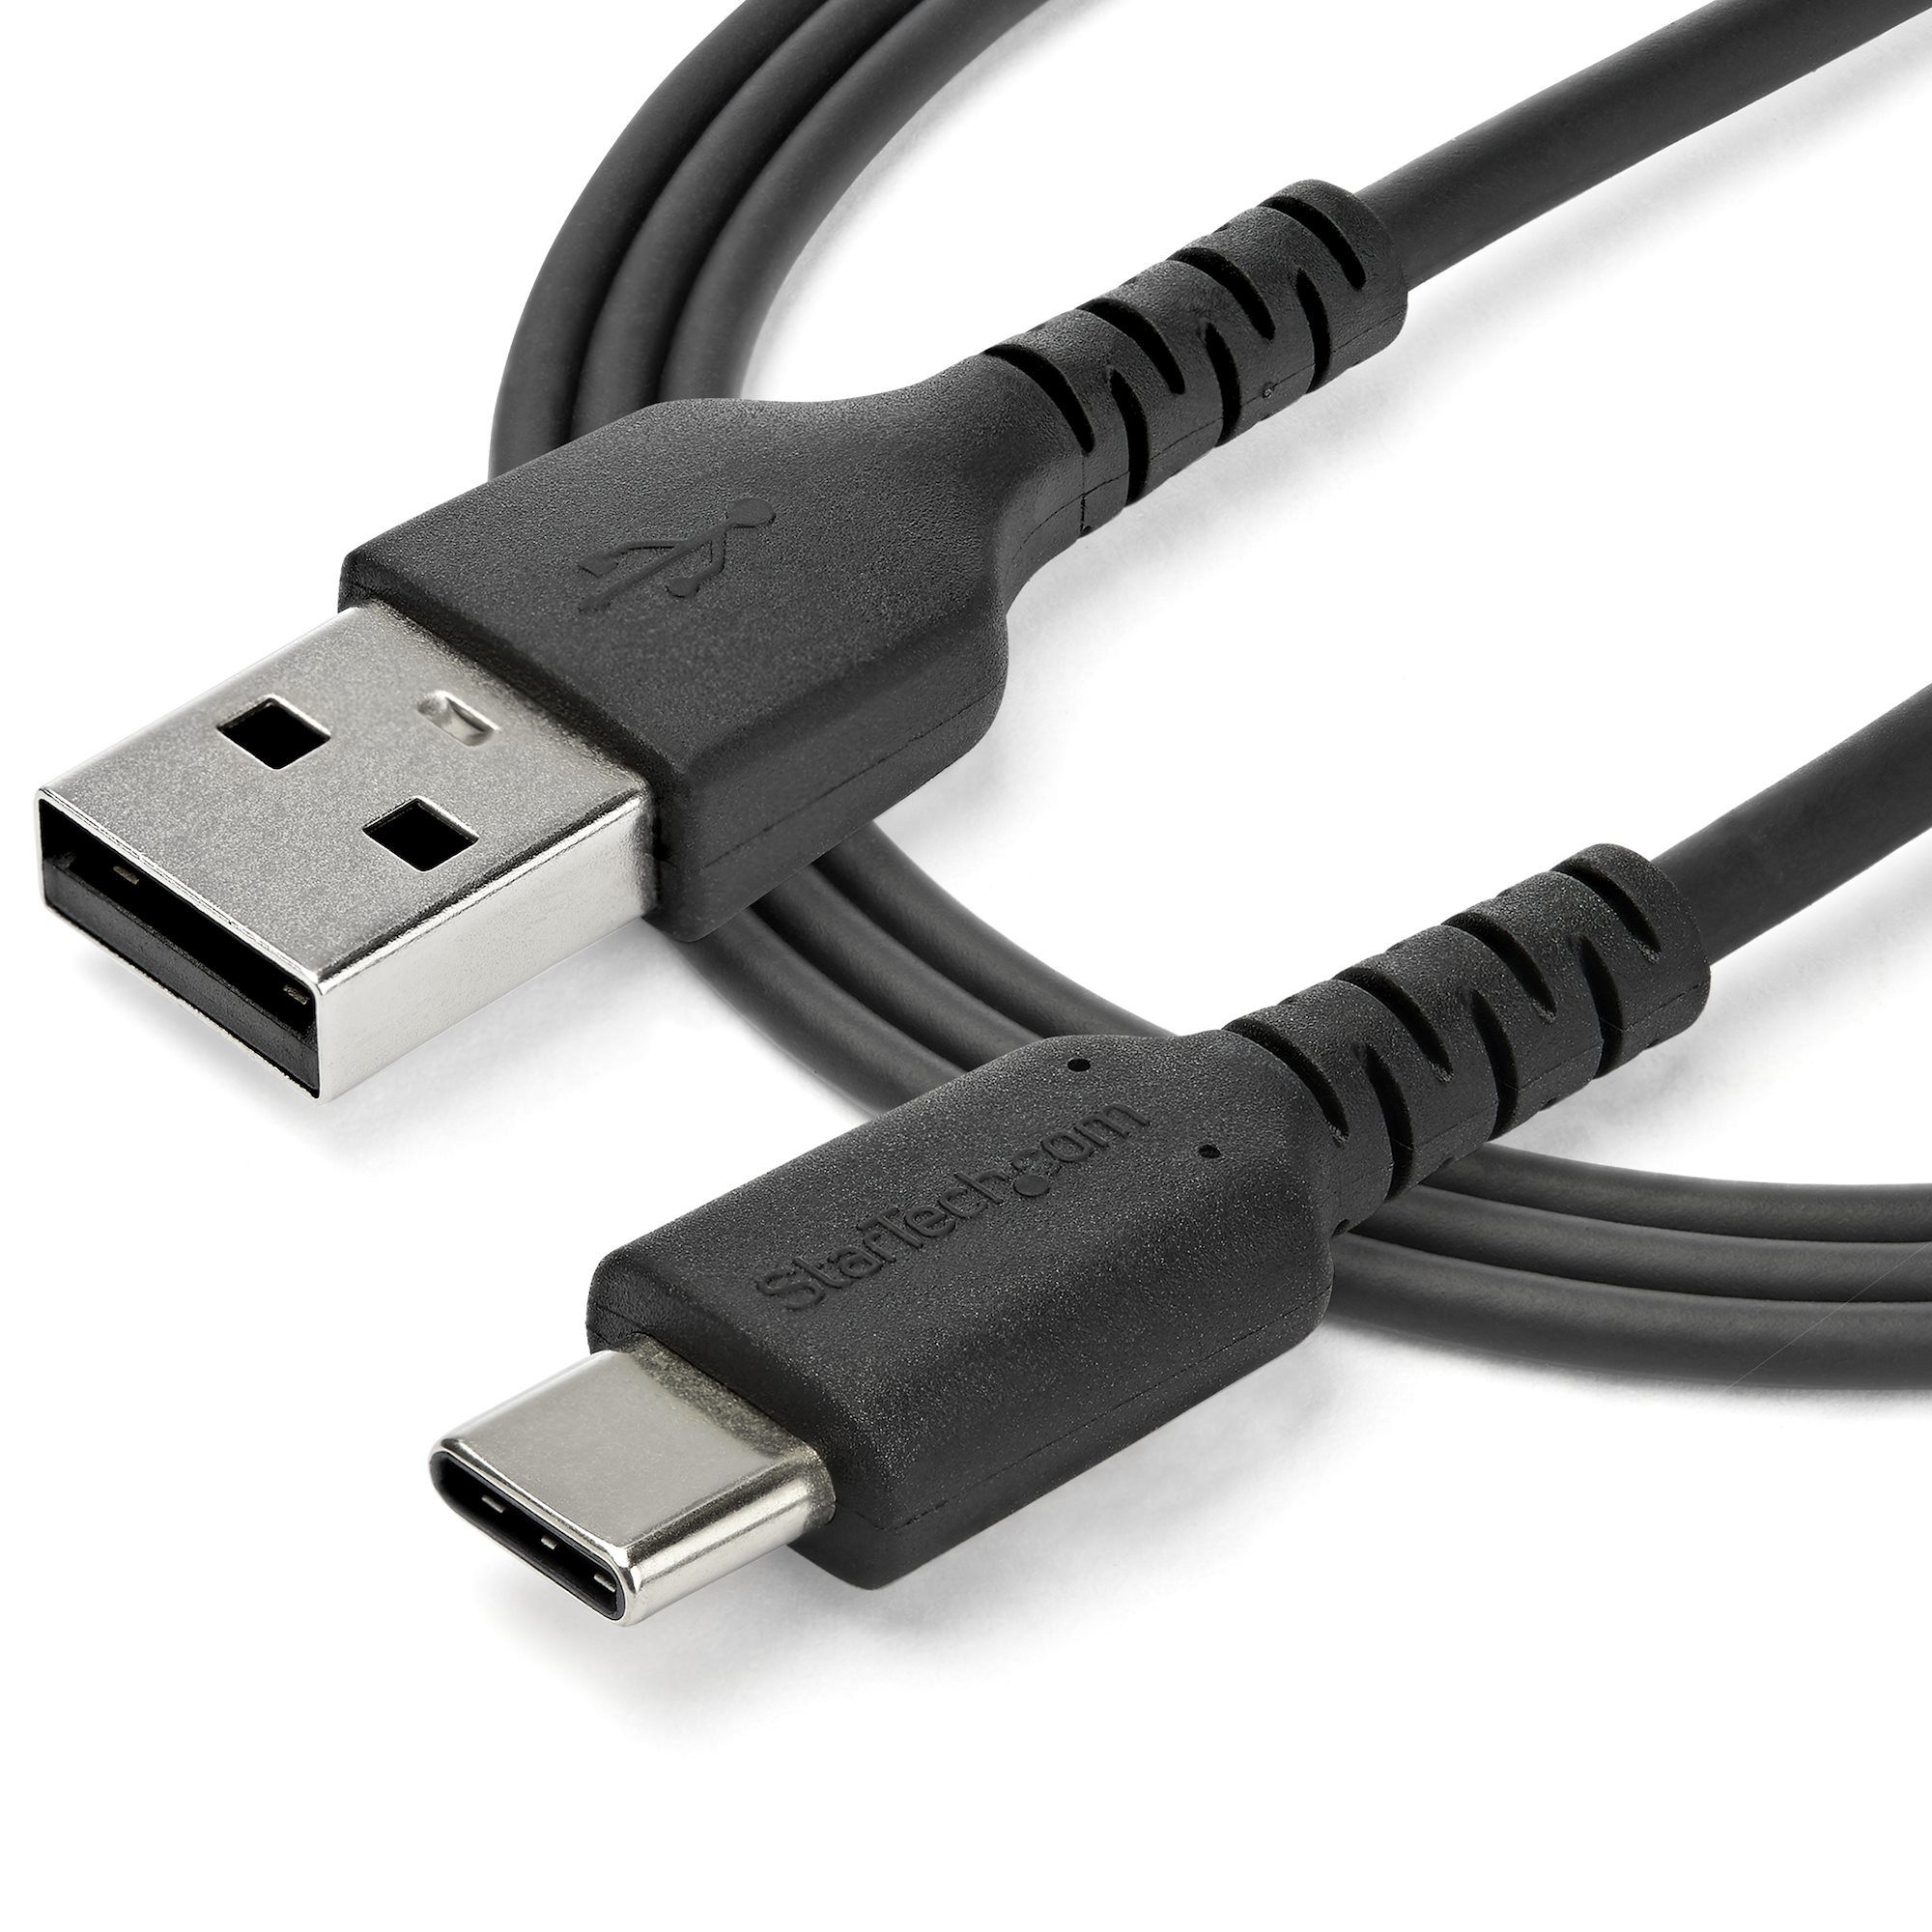 2m USB A to USB Charging Cable Durable - USB-C Cables StarTech.com